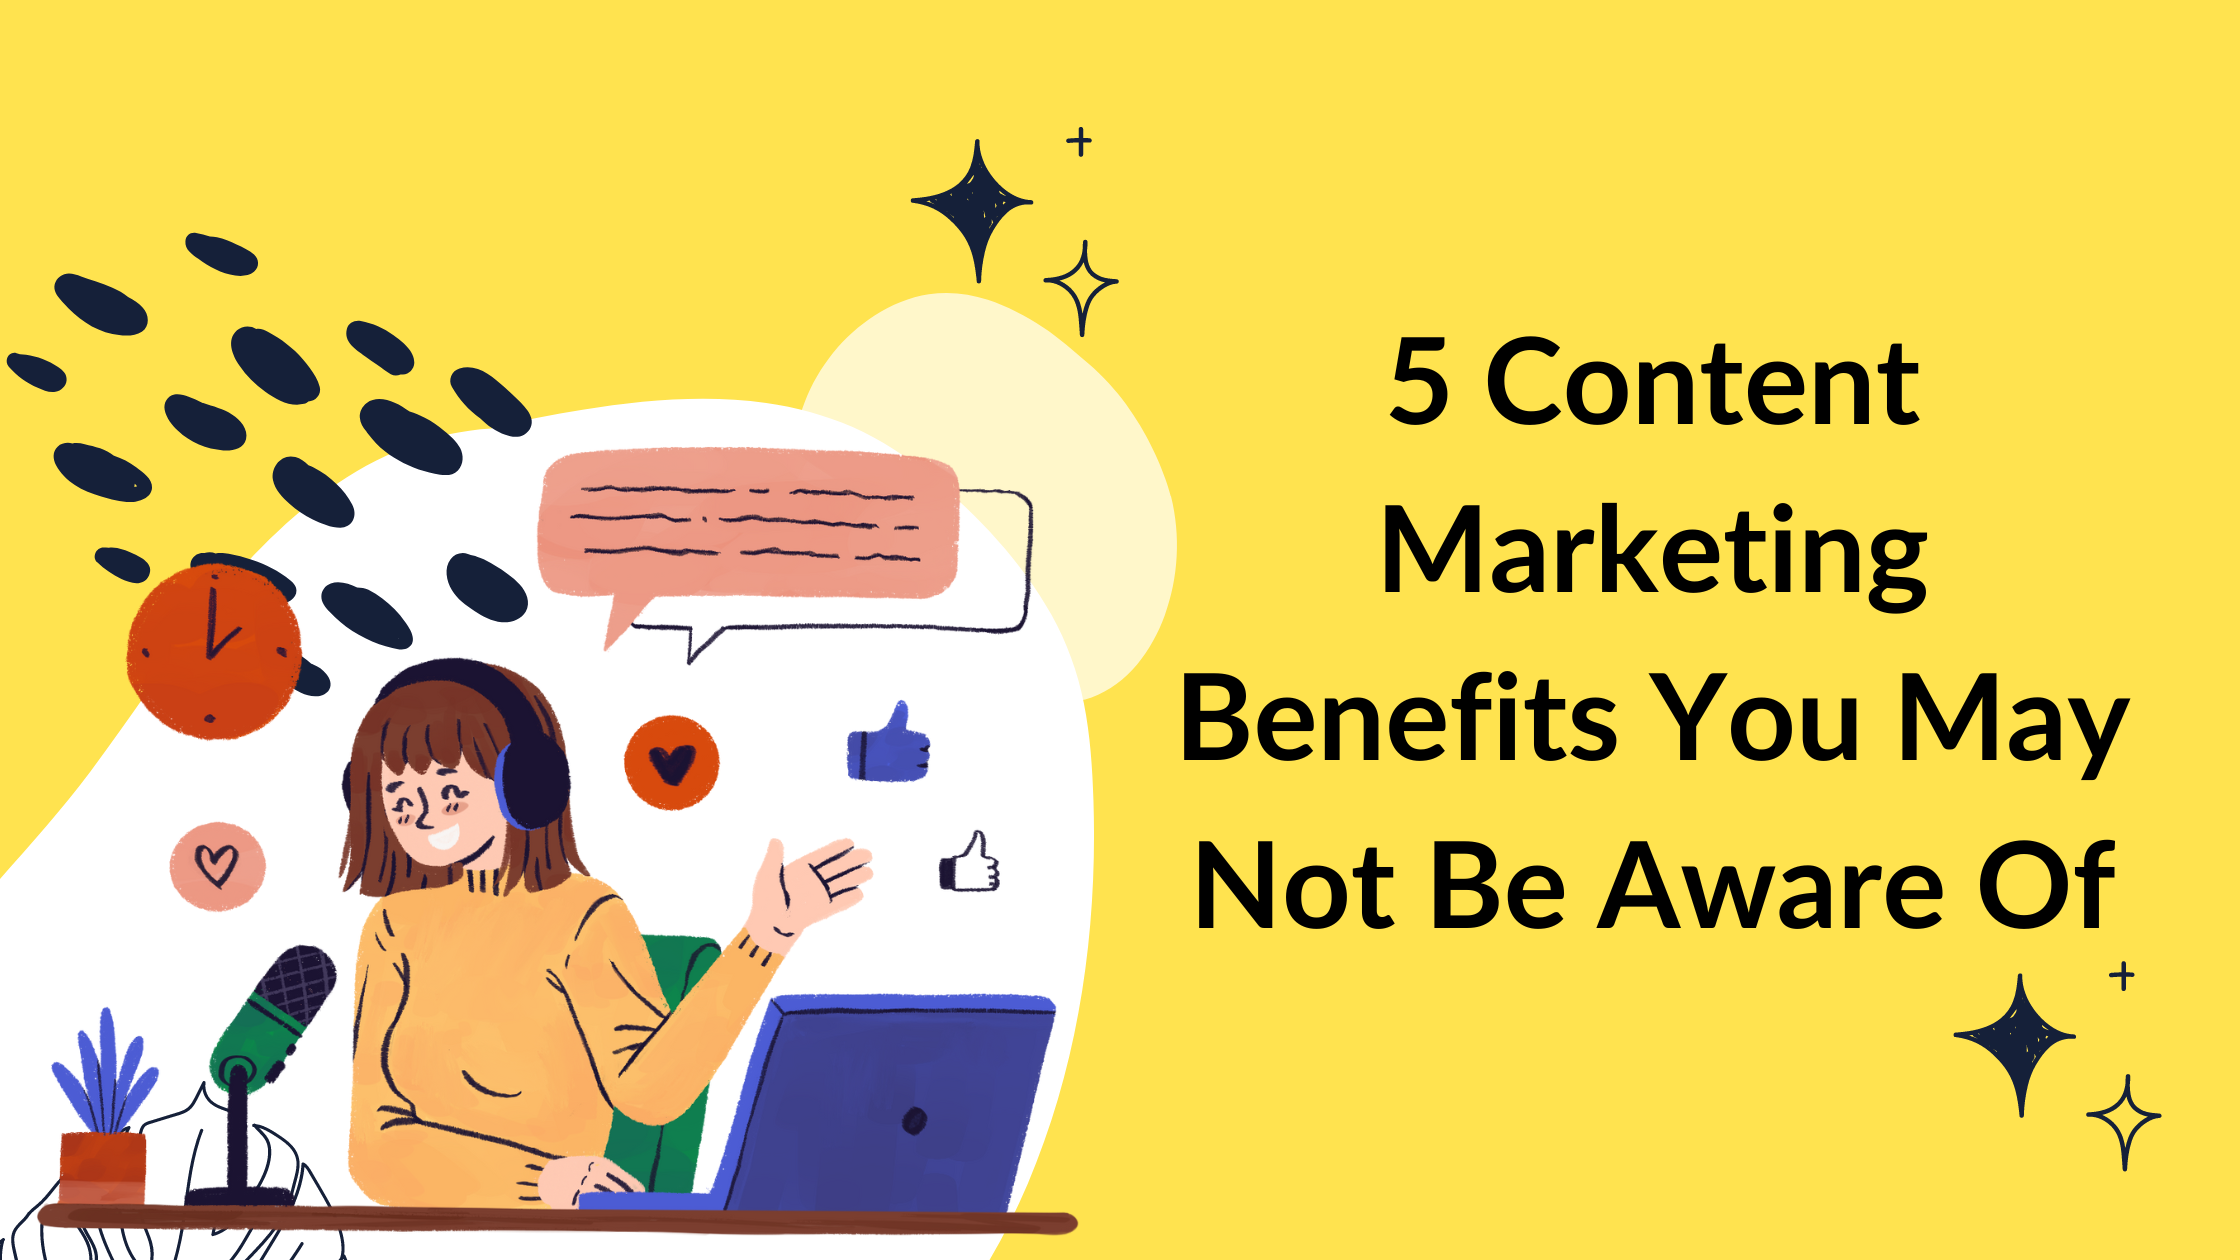 5 Content Marketing Benefits You May Not Be Aware Of